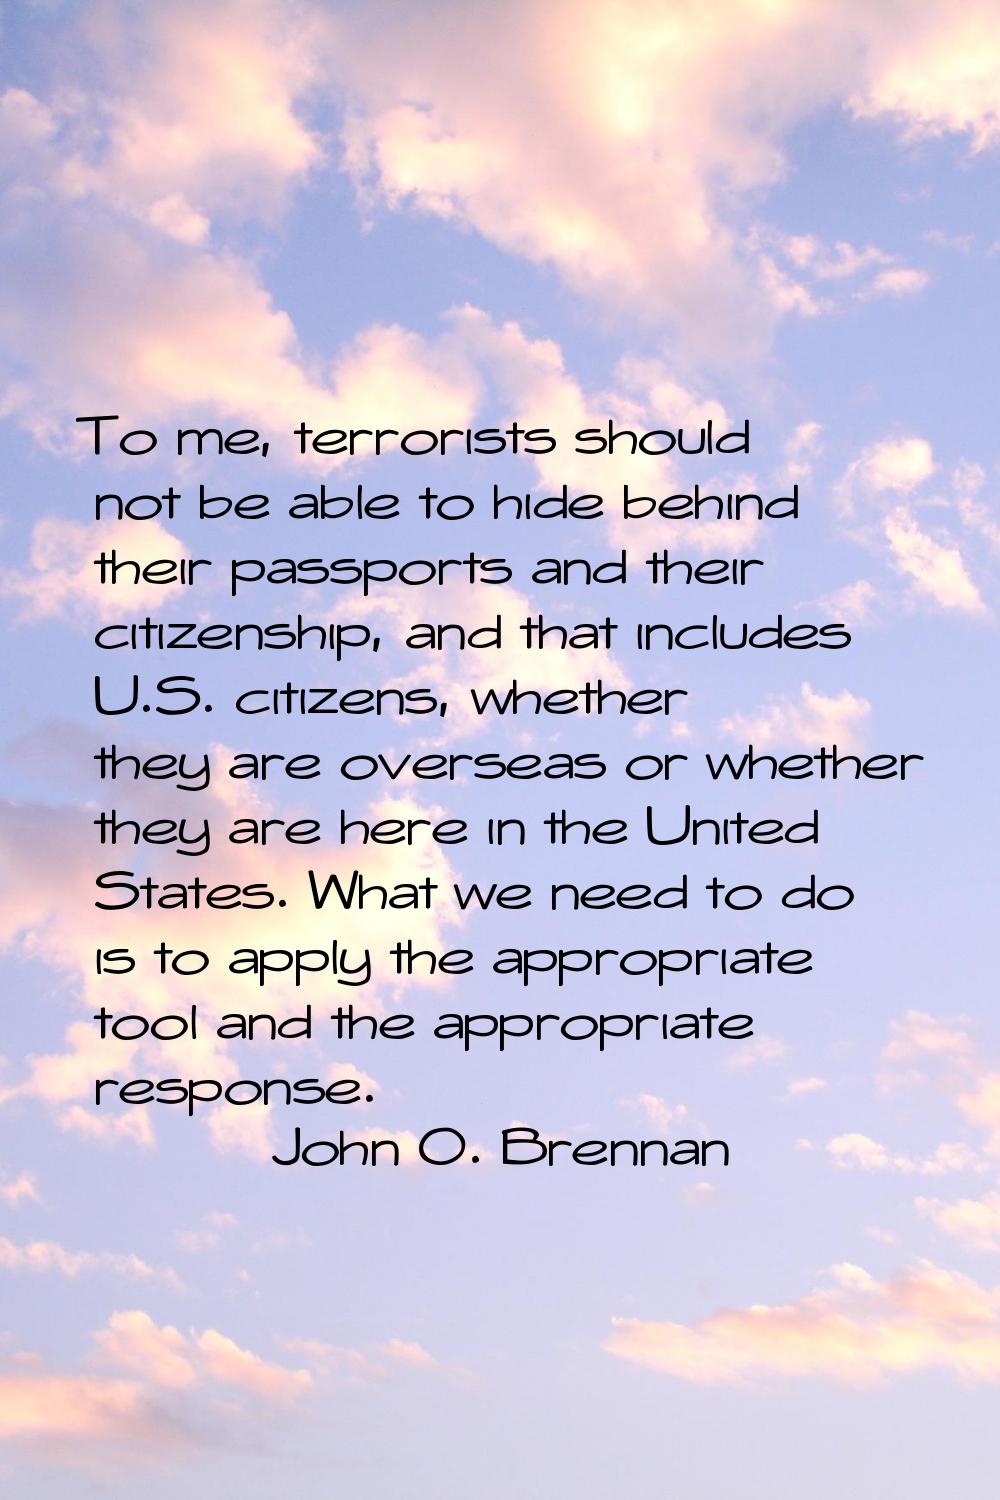 To me, terrorists should not be able to hide behind their passports and their citizenship, and that